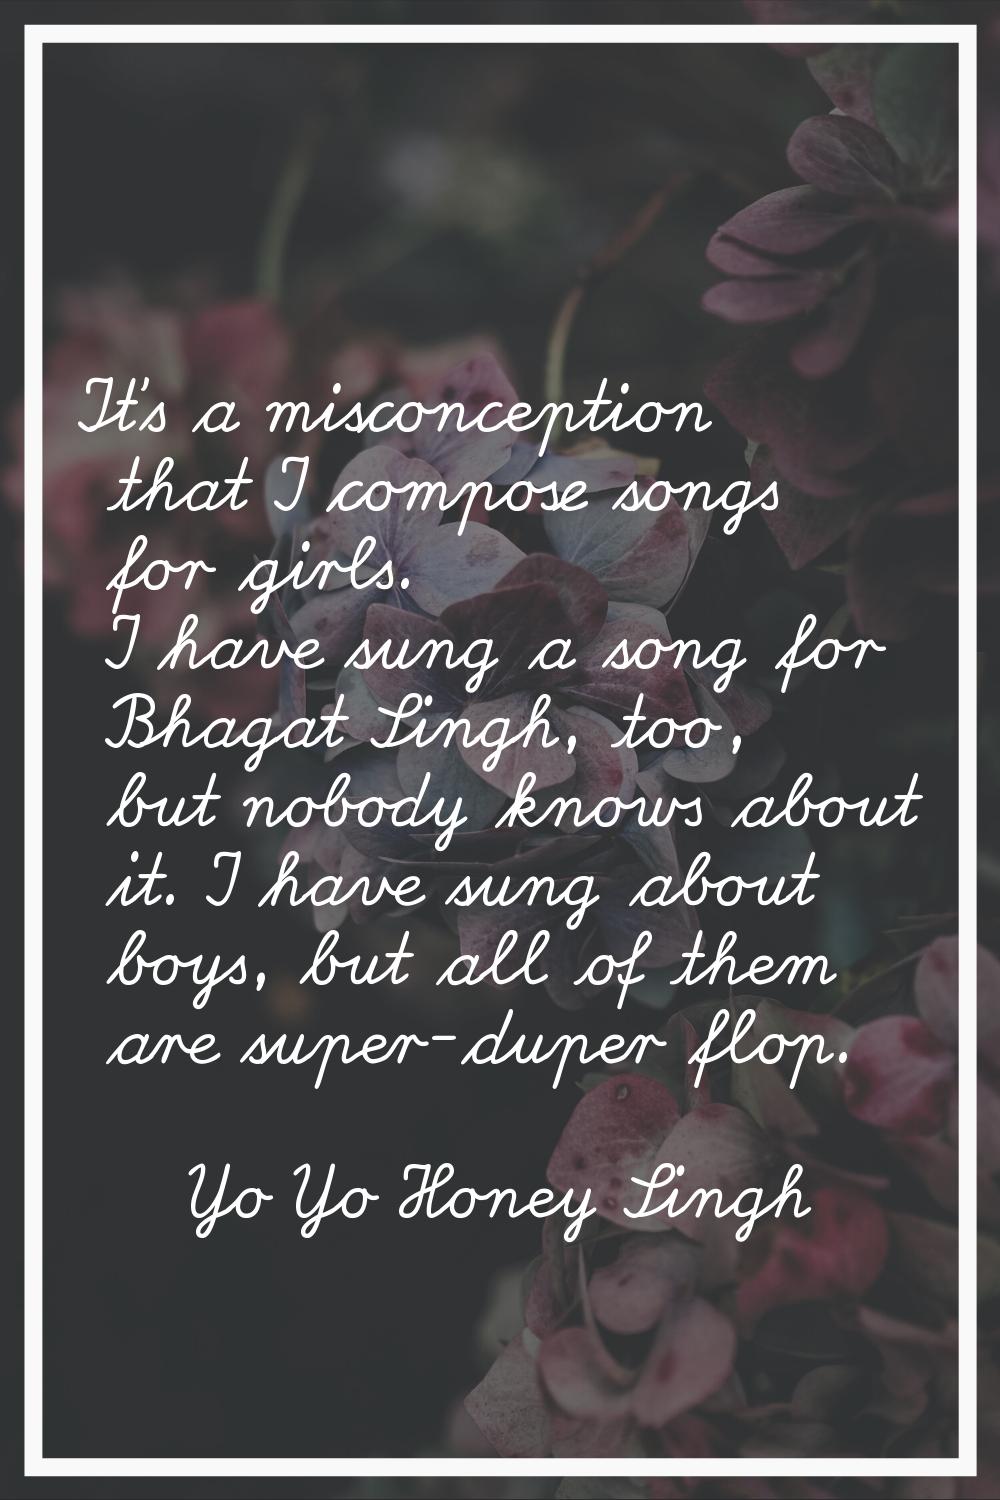 It's a misconception that I compose songs for girls. I have sung a song for Bhagat Singh, too, but 